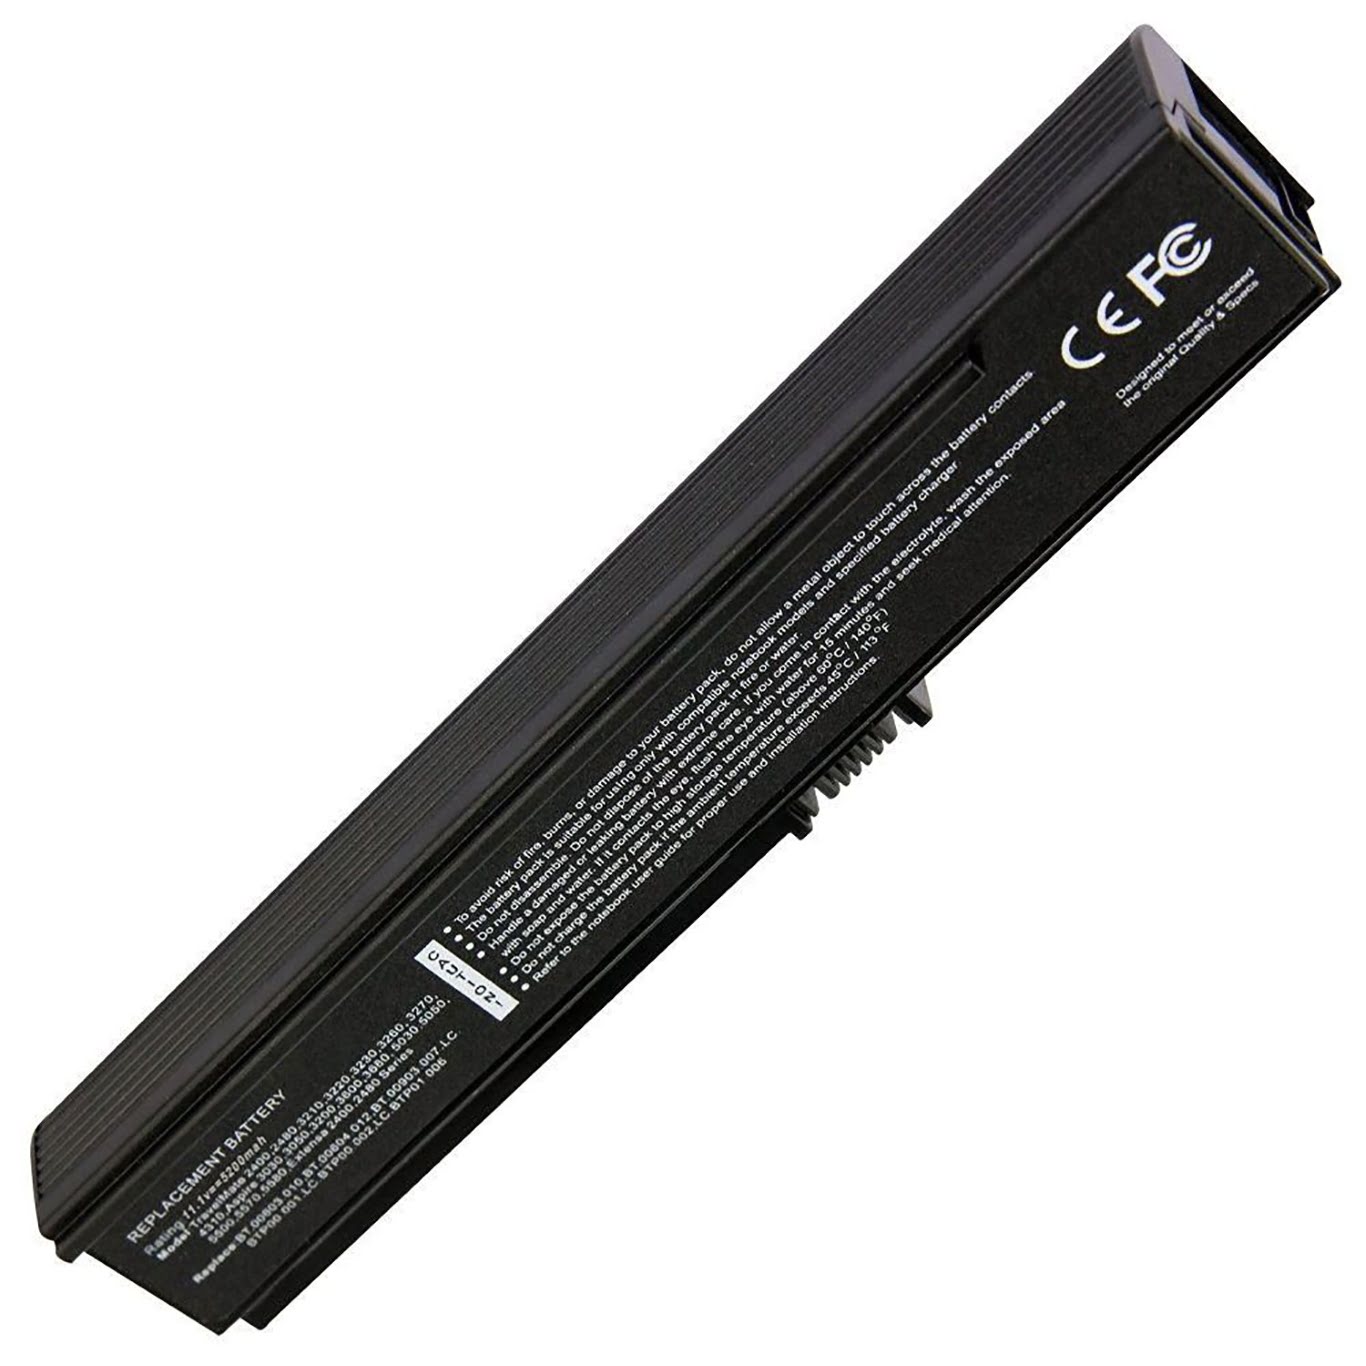 Acer 3ur18650f-3-qc-zr1, 3ur18650y-2-qc261 Laptop Battery For Aspire 3030, Aspire 3050 replacement